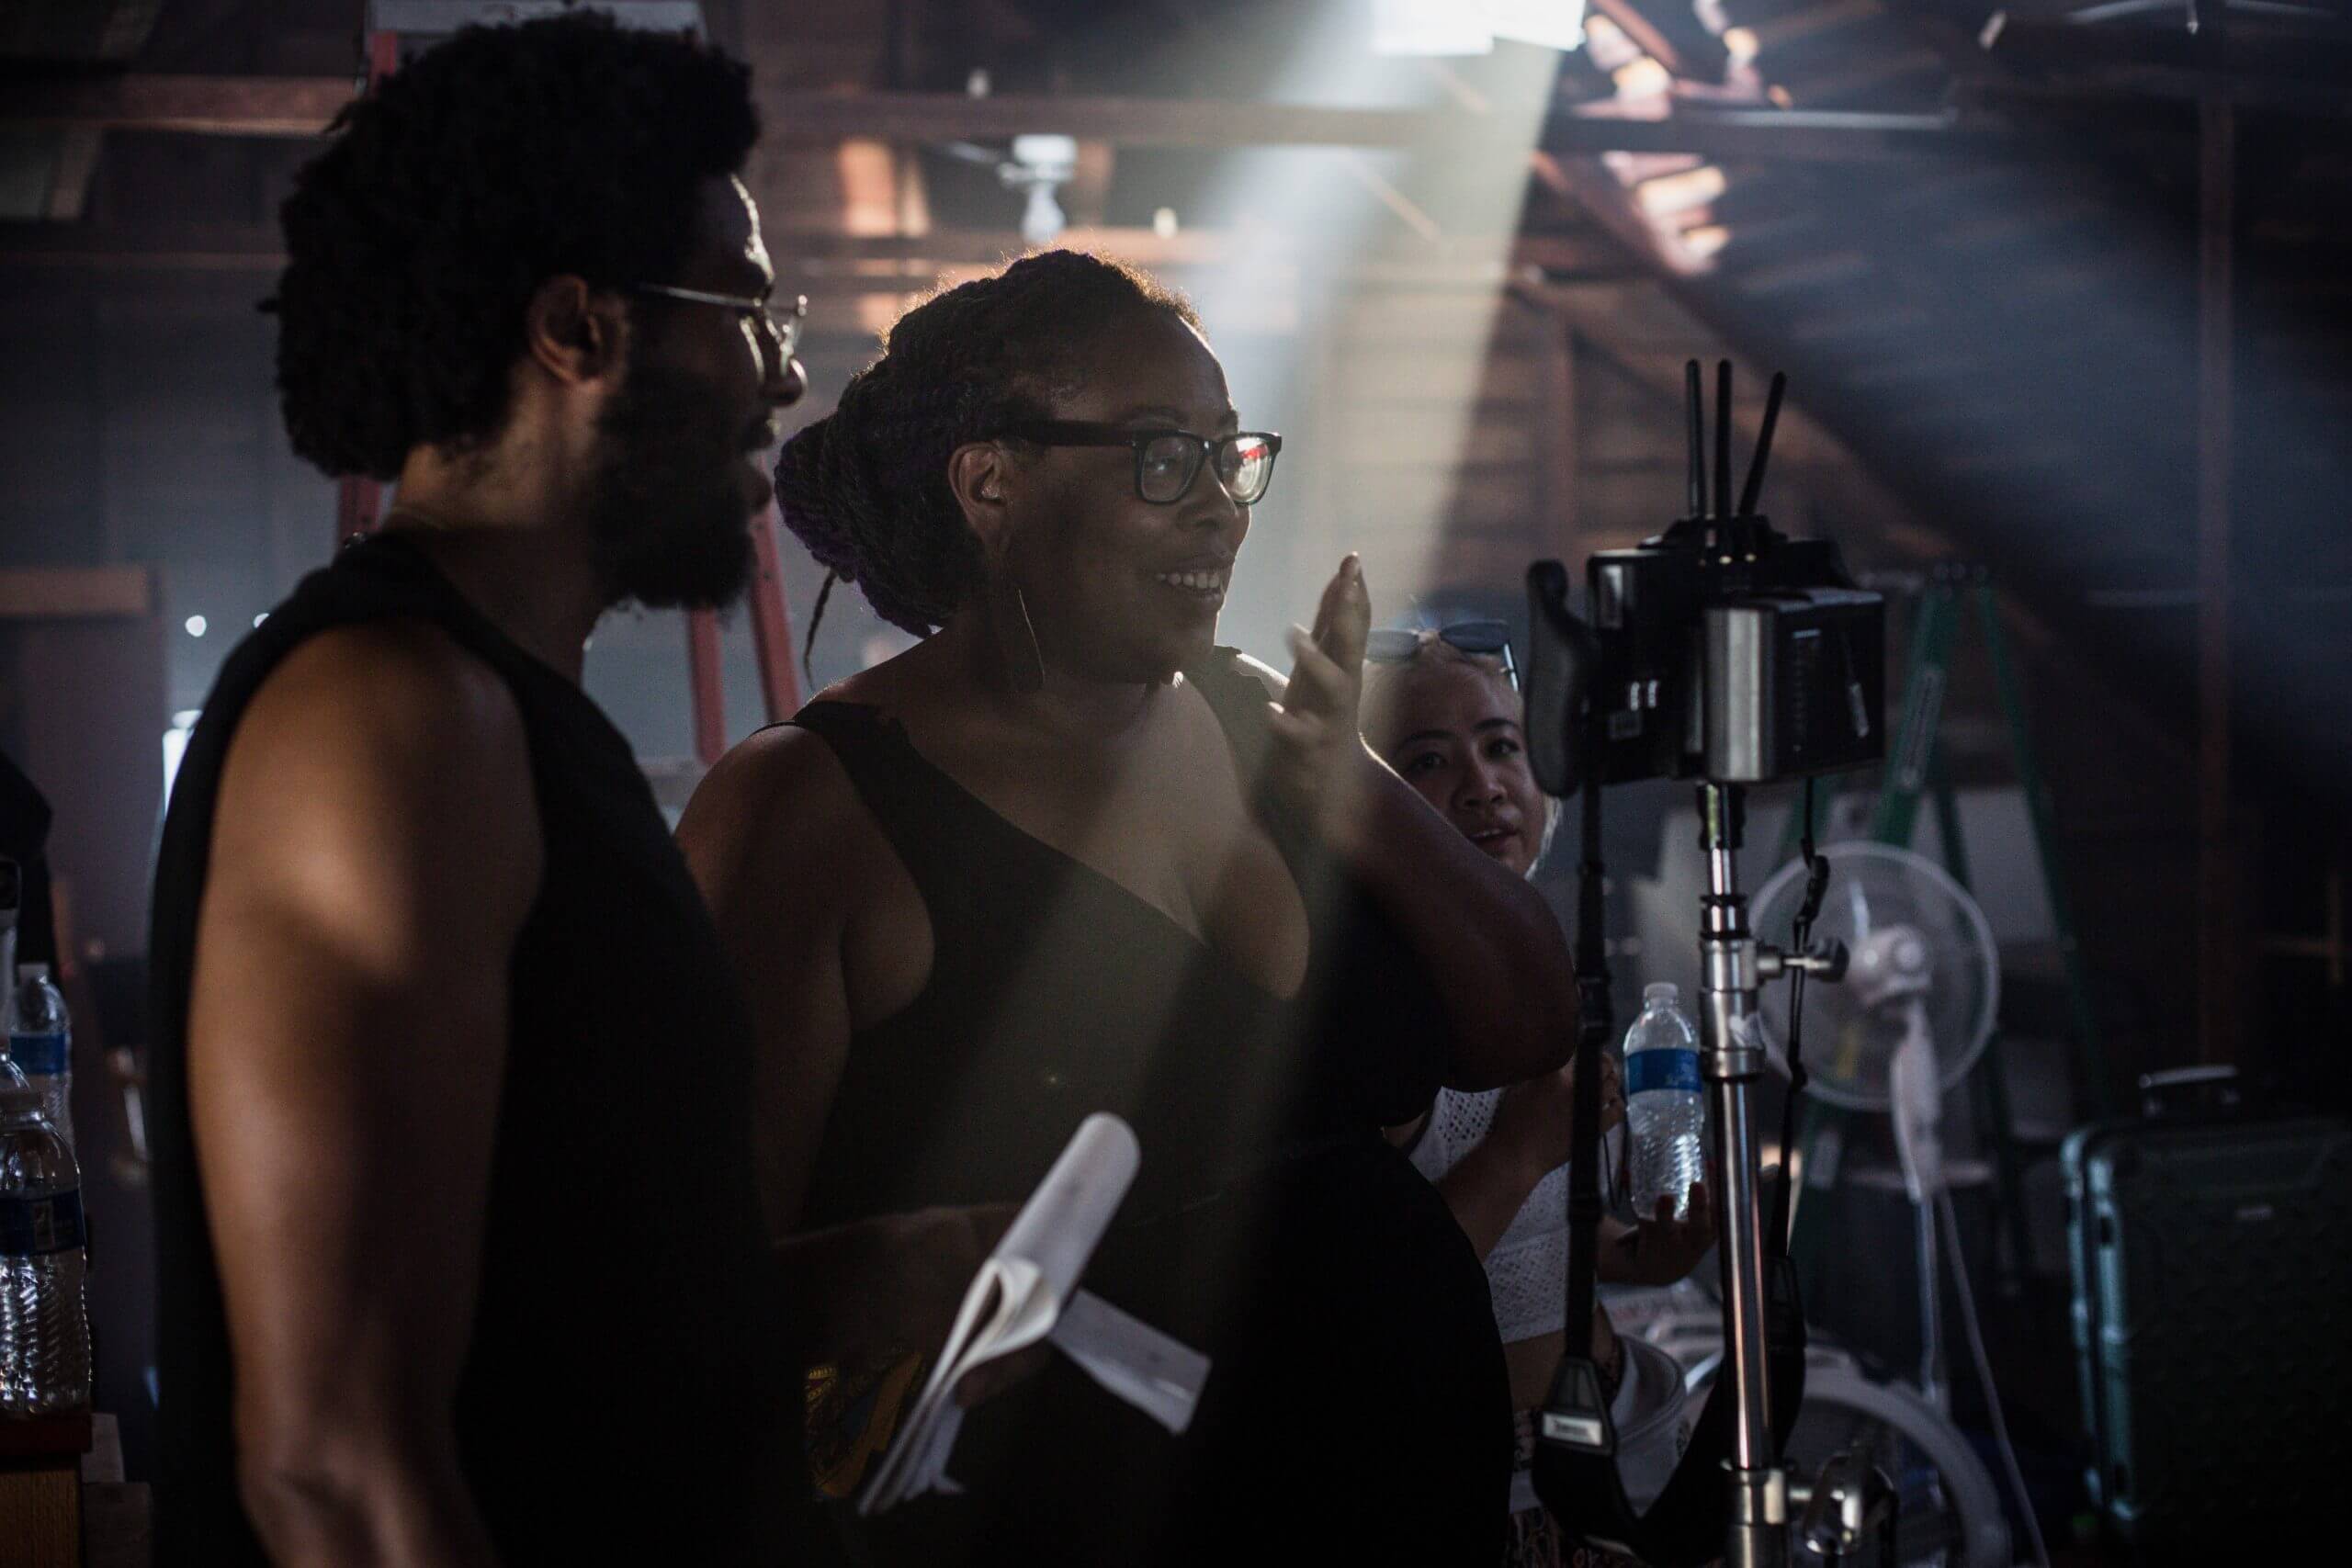 Production still of Angela Tucker looking into a camera monitor with her hand over her mouth and smiling. She is wearing glasses and has her hair in a bun. Standing next to her is a man wearing glasses and holding a notebook.